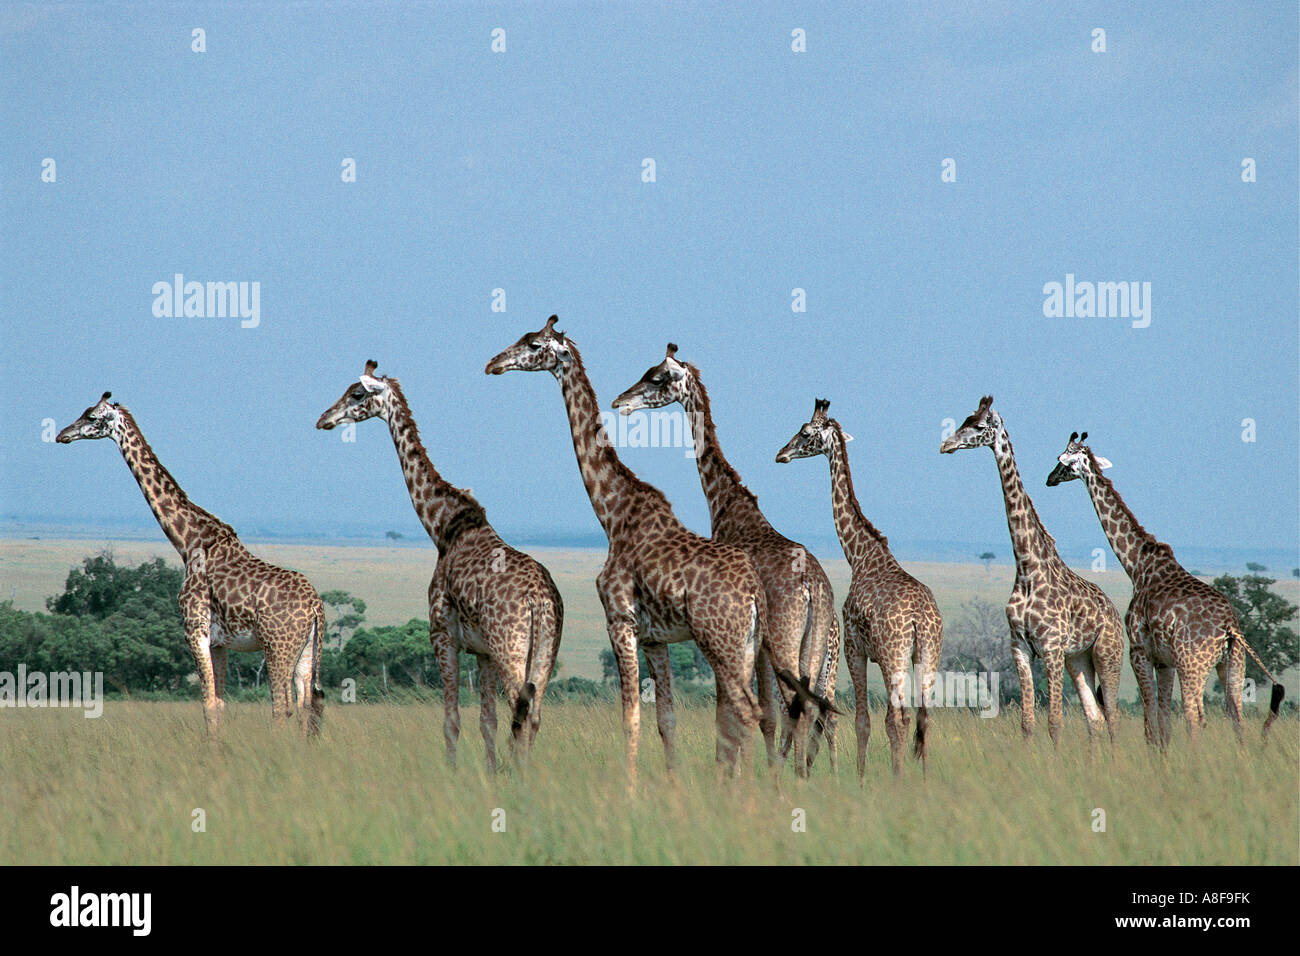 Herd of Masai or Common Giraffe Masai Mara National Reserve Kenya They are all facing the same way and look very alert Stock Photo